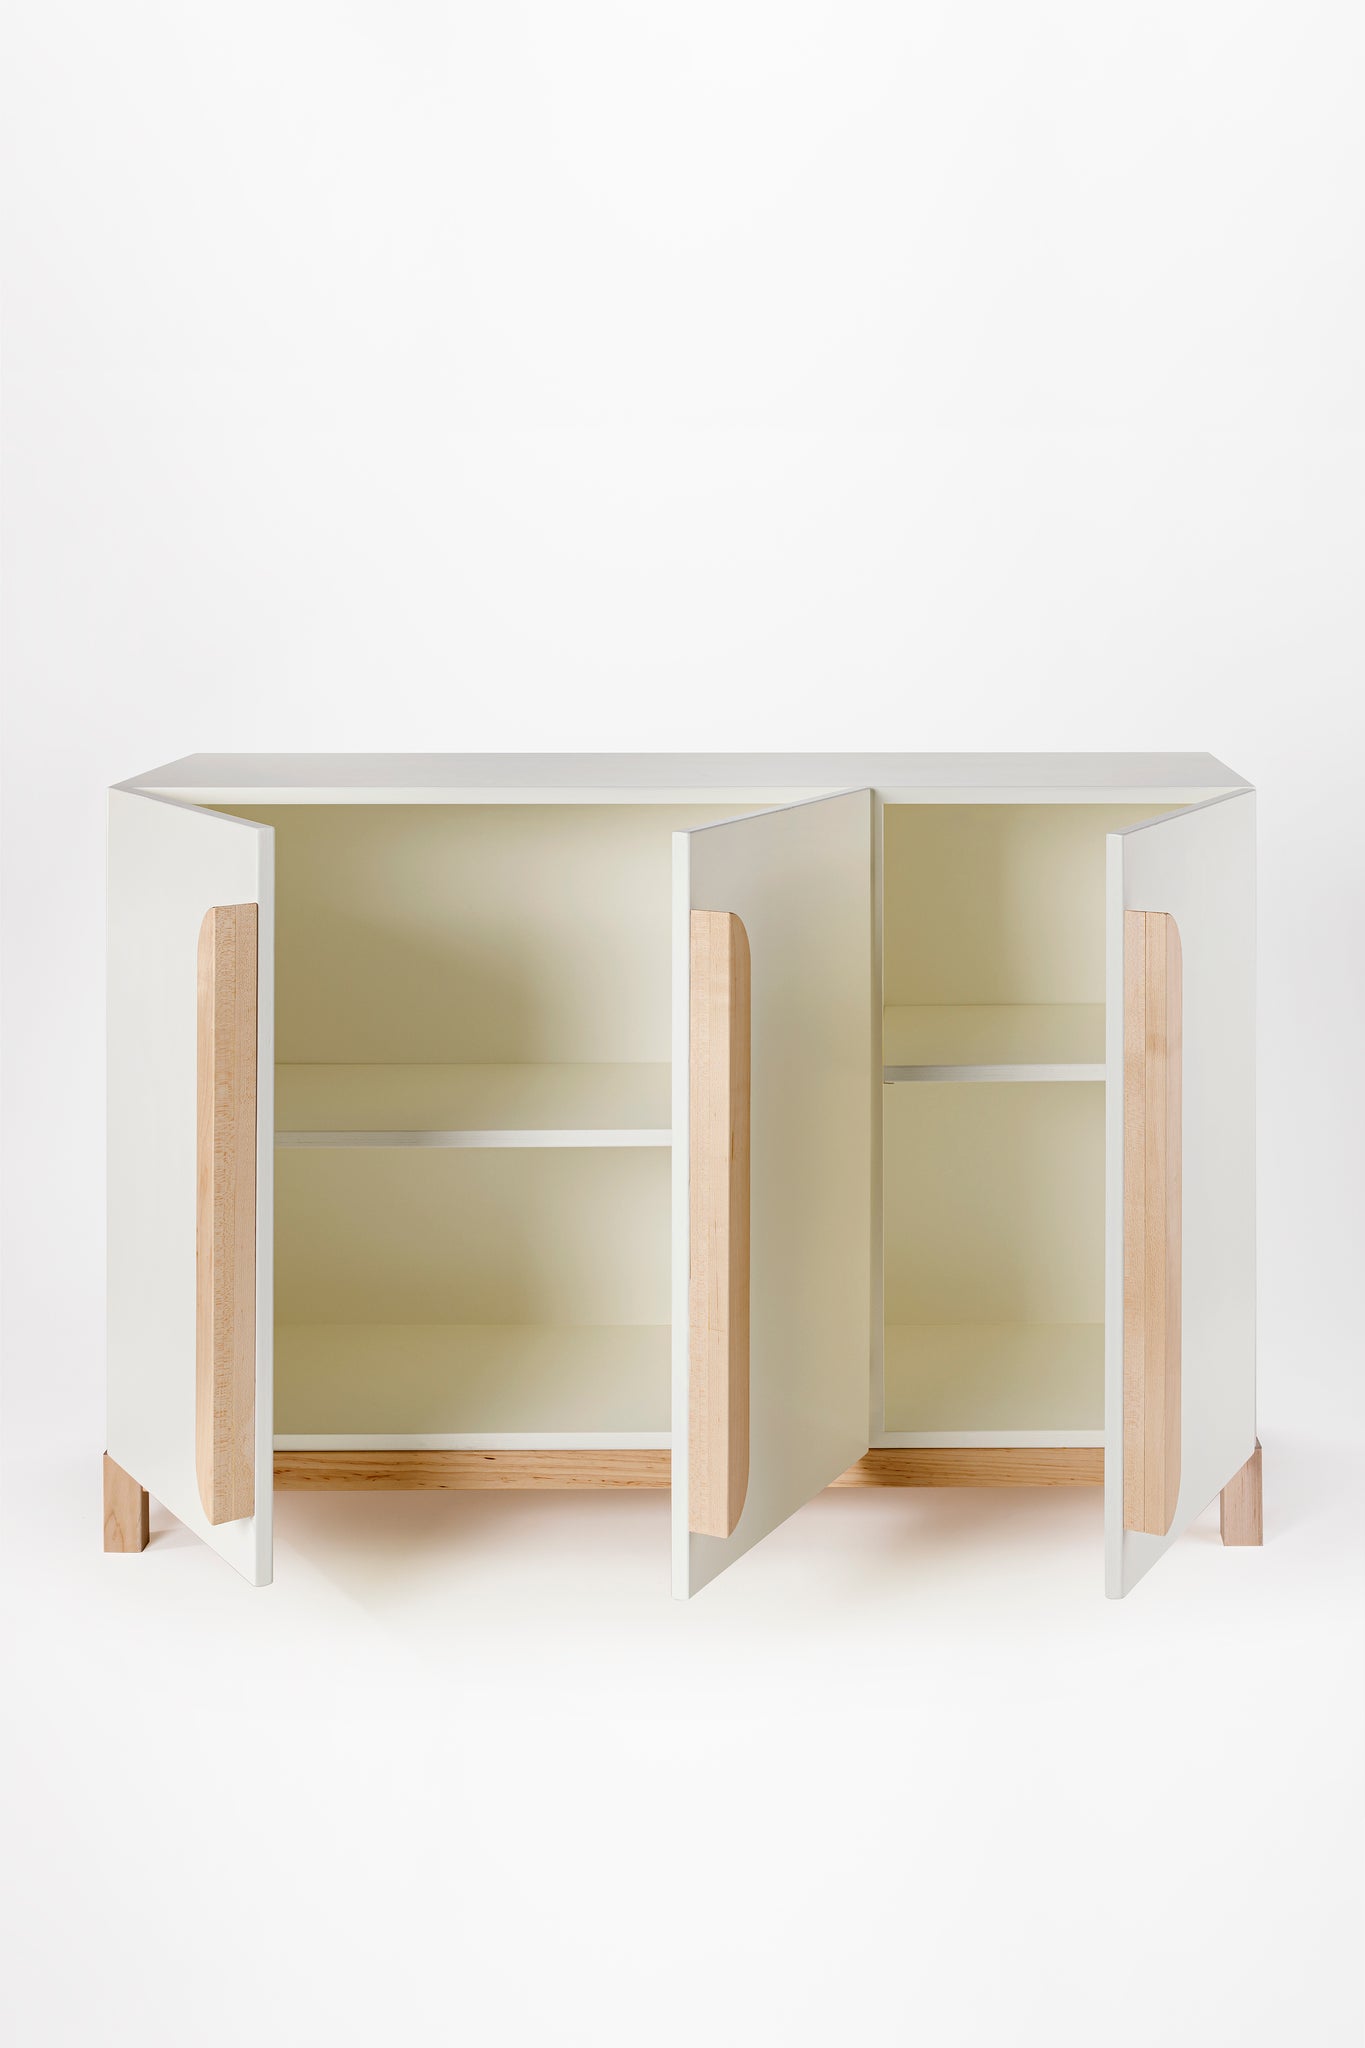 Doors wide open on the Milton & Goose Credenza in White. Inside features a shelf for plenty of storage.